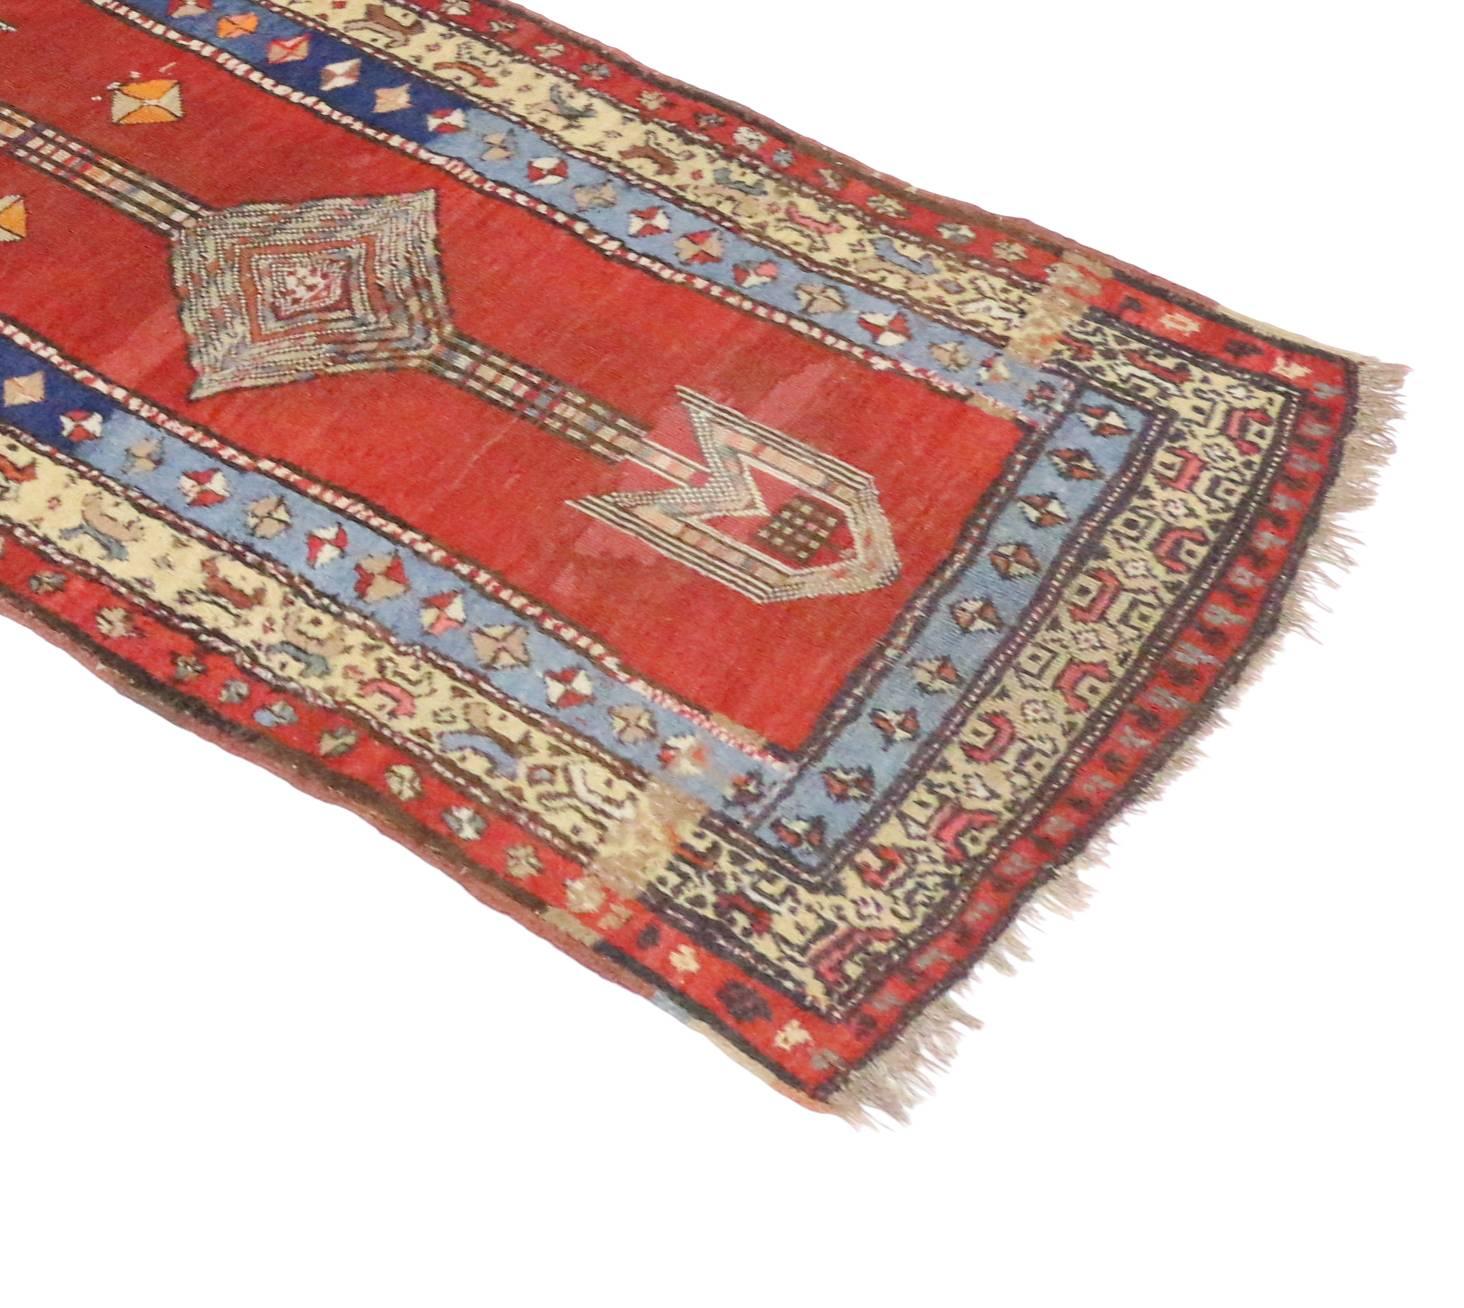 Antique Persian Sarab Runner with Mid-Century Modern Tribal Style 5